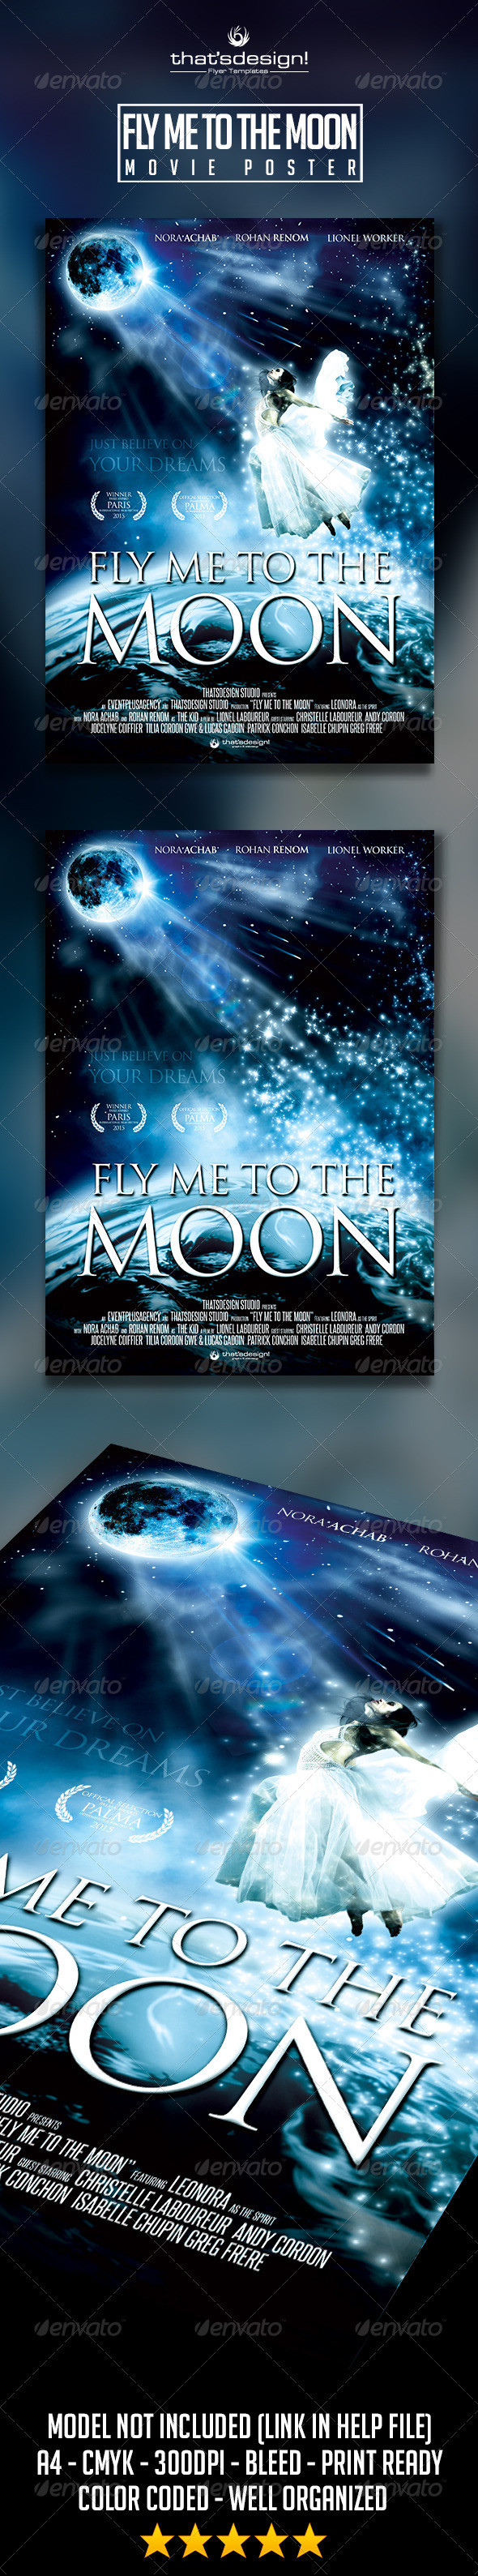 Image 20preview 20fly 20me 20to 20the 20moon 20movie 20poster2